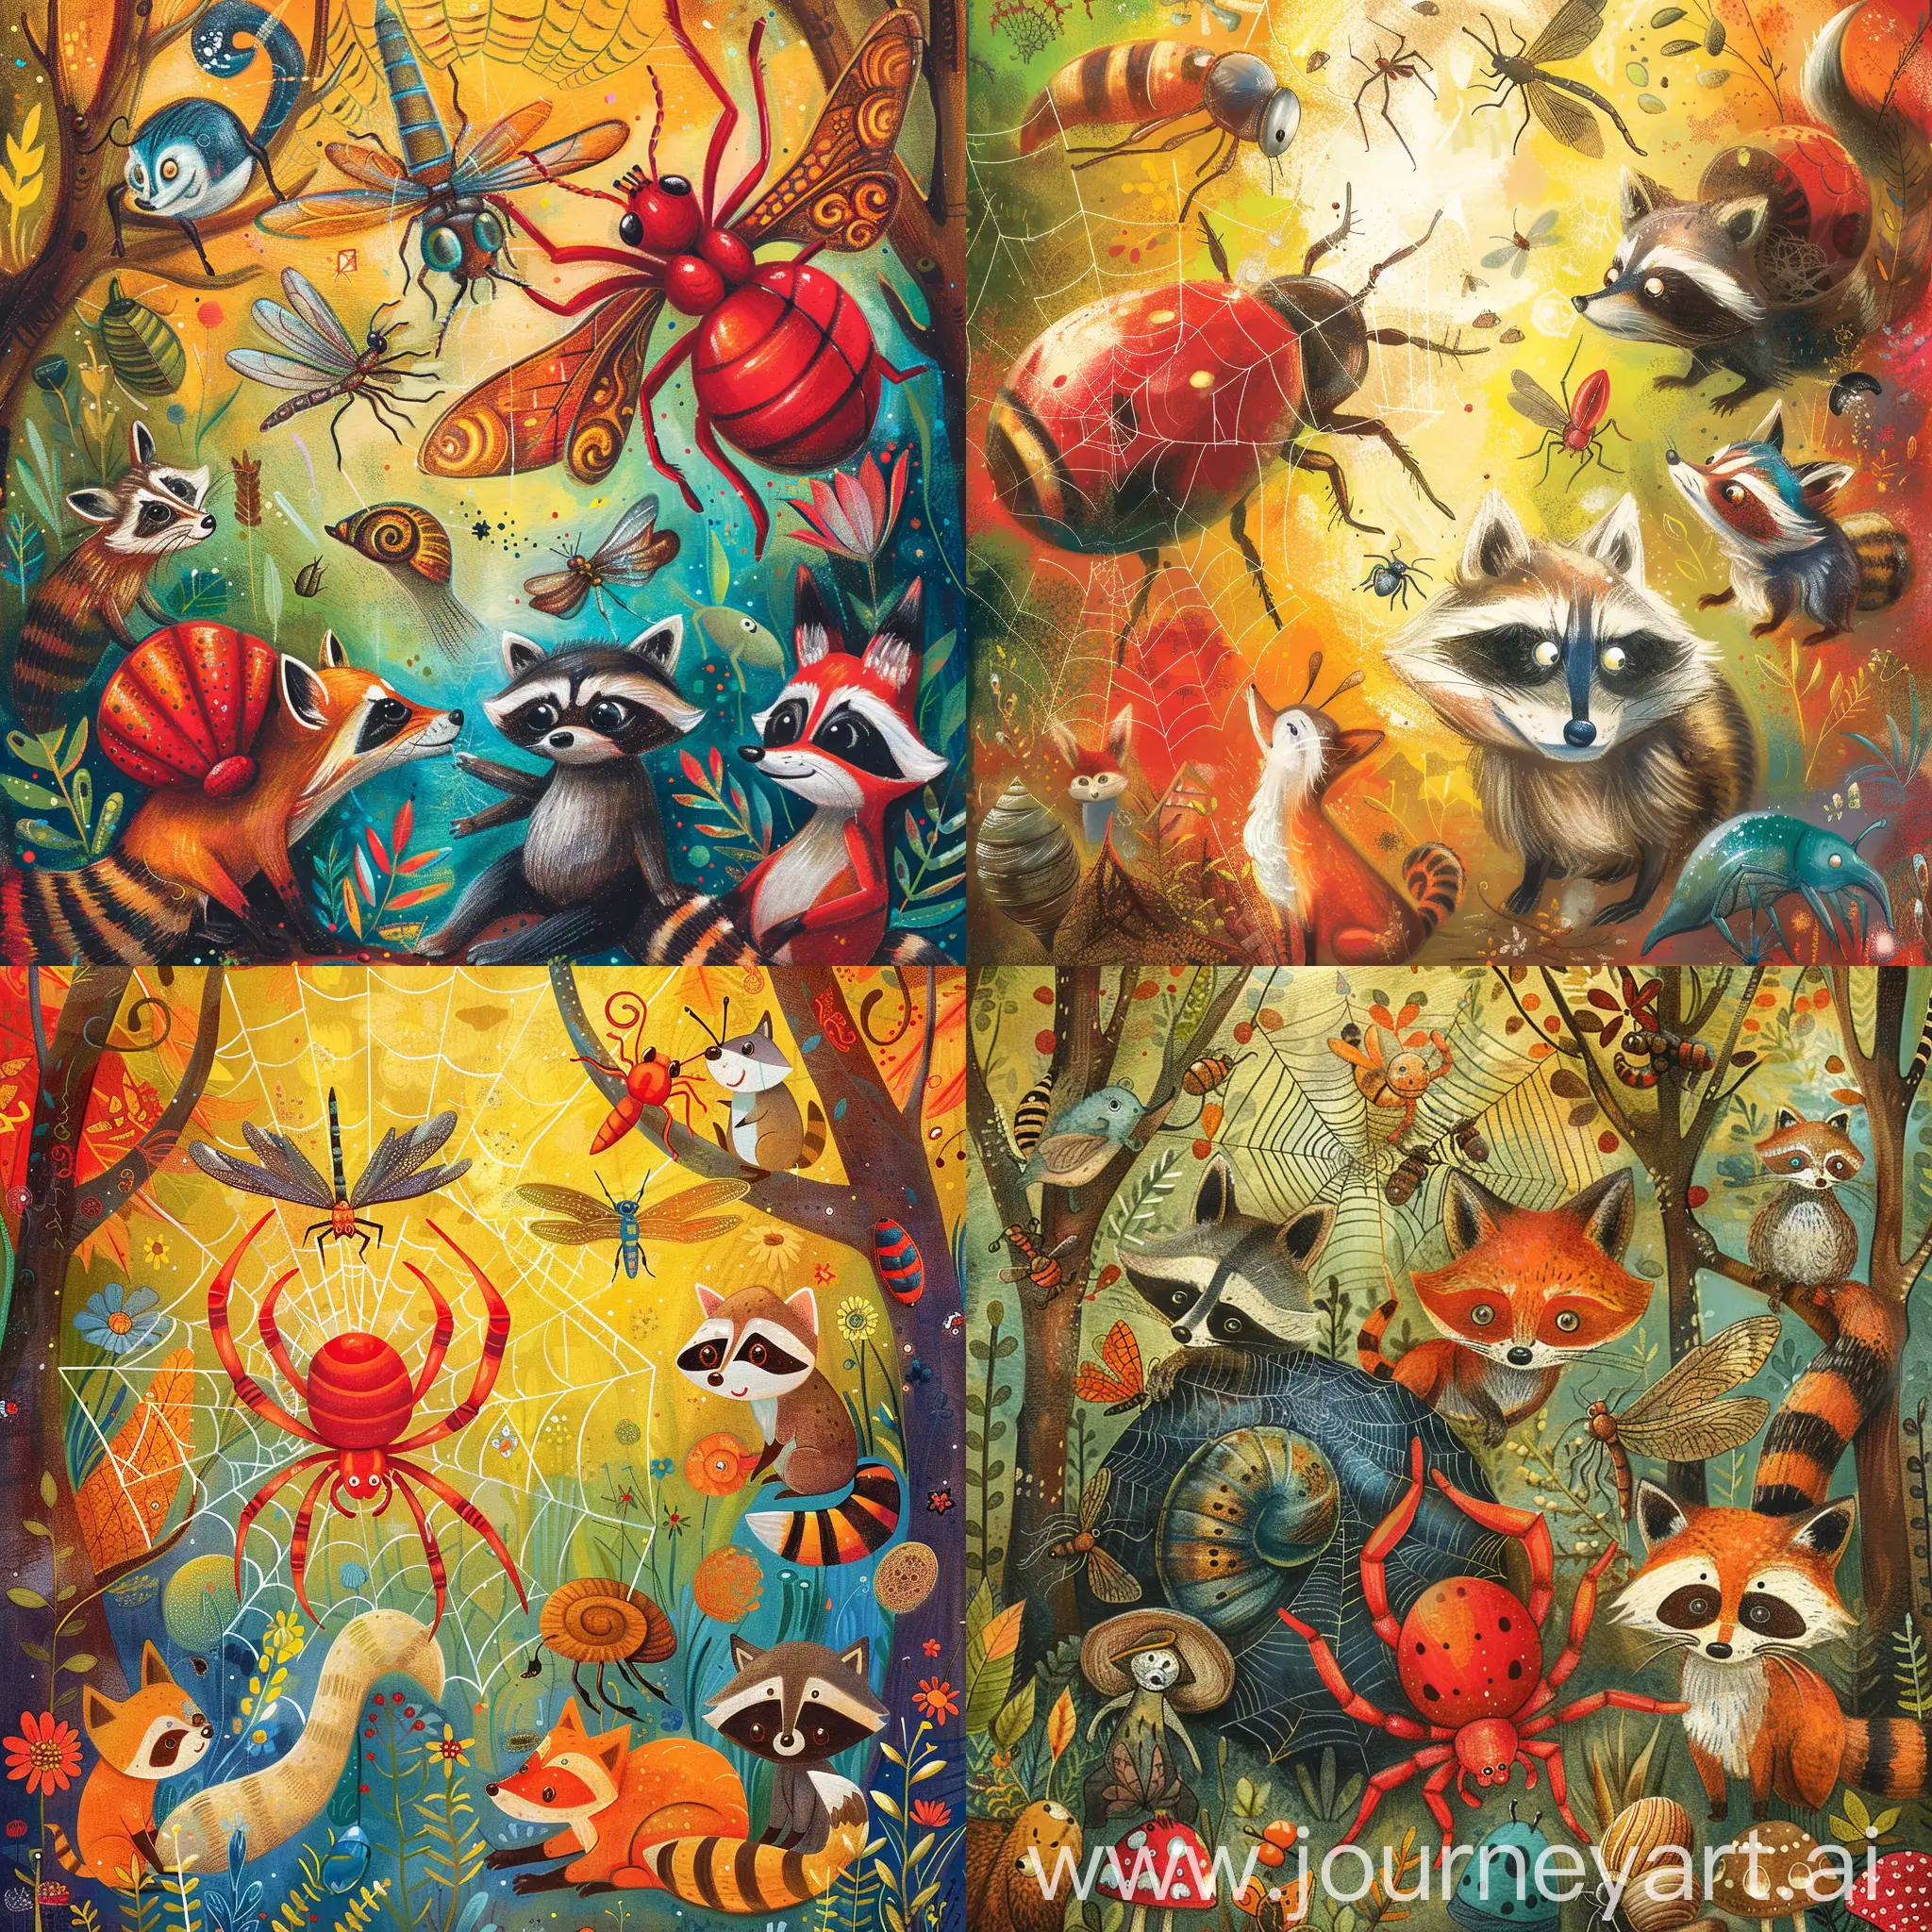 'Designed in a woodland animal fairy tale style ((red spider laying a web)), featuring enchanting, friendly scarabs, snails, raccoons, foxes, dragonflies, mythical creatures, and whimsical characters on a vibrant, colorful background to capture young readers' attention and spark their imaginations.